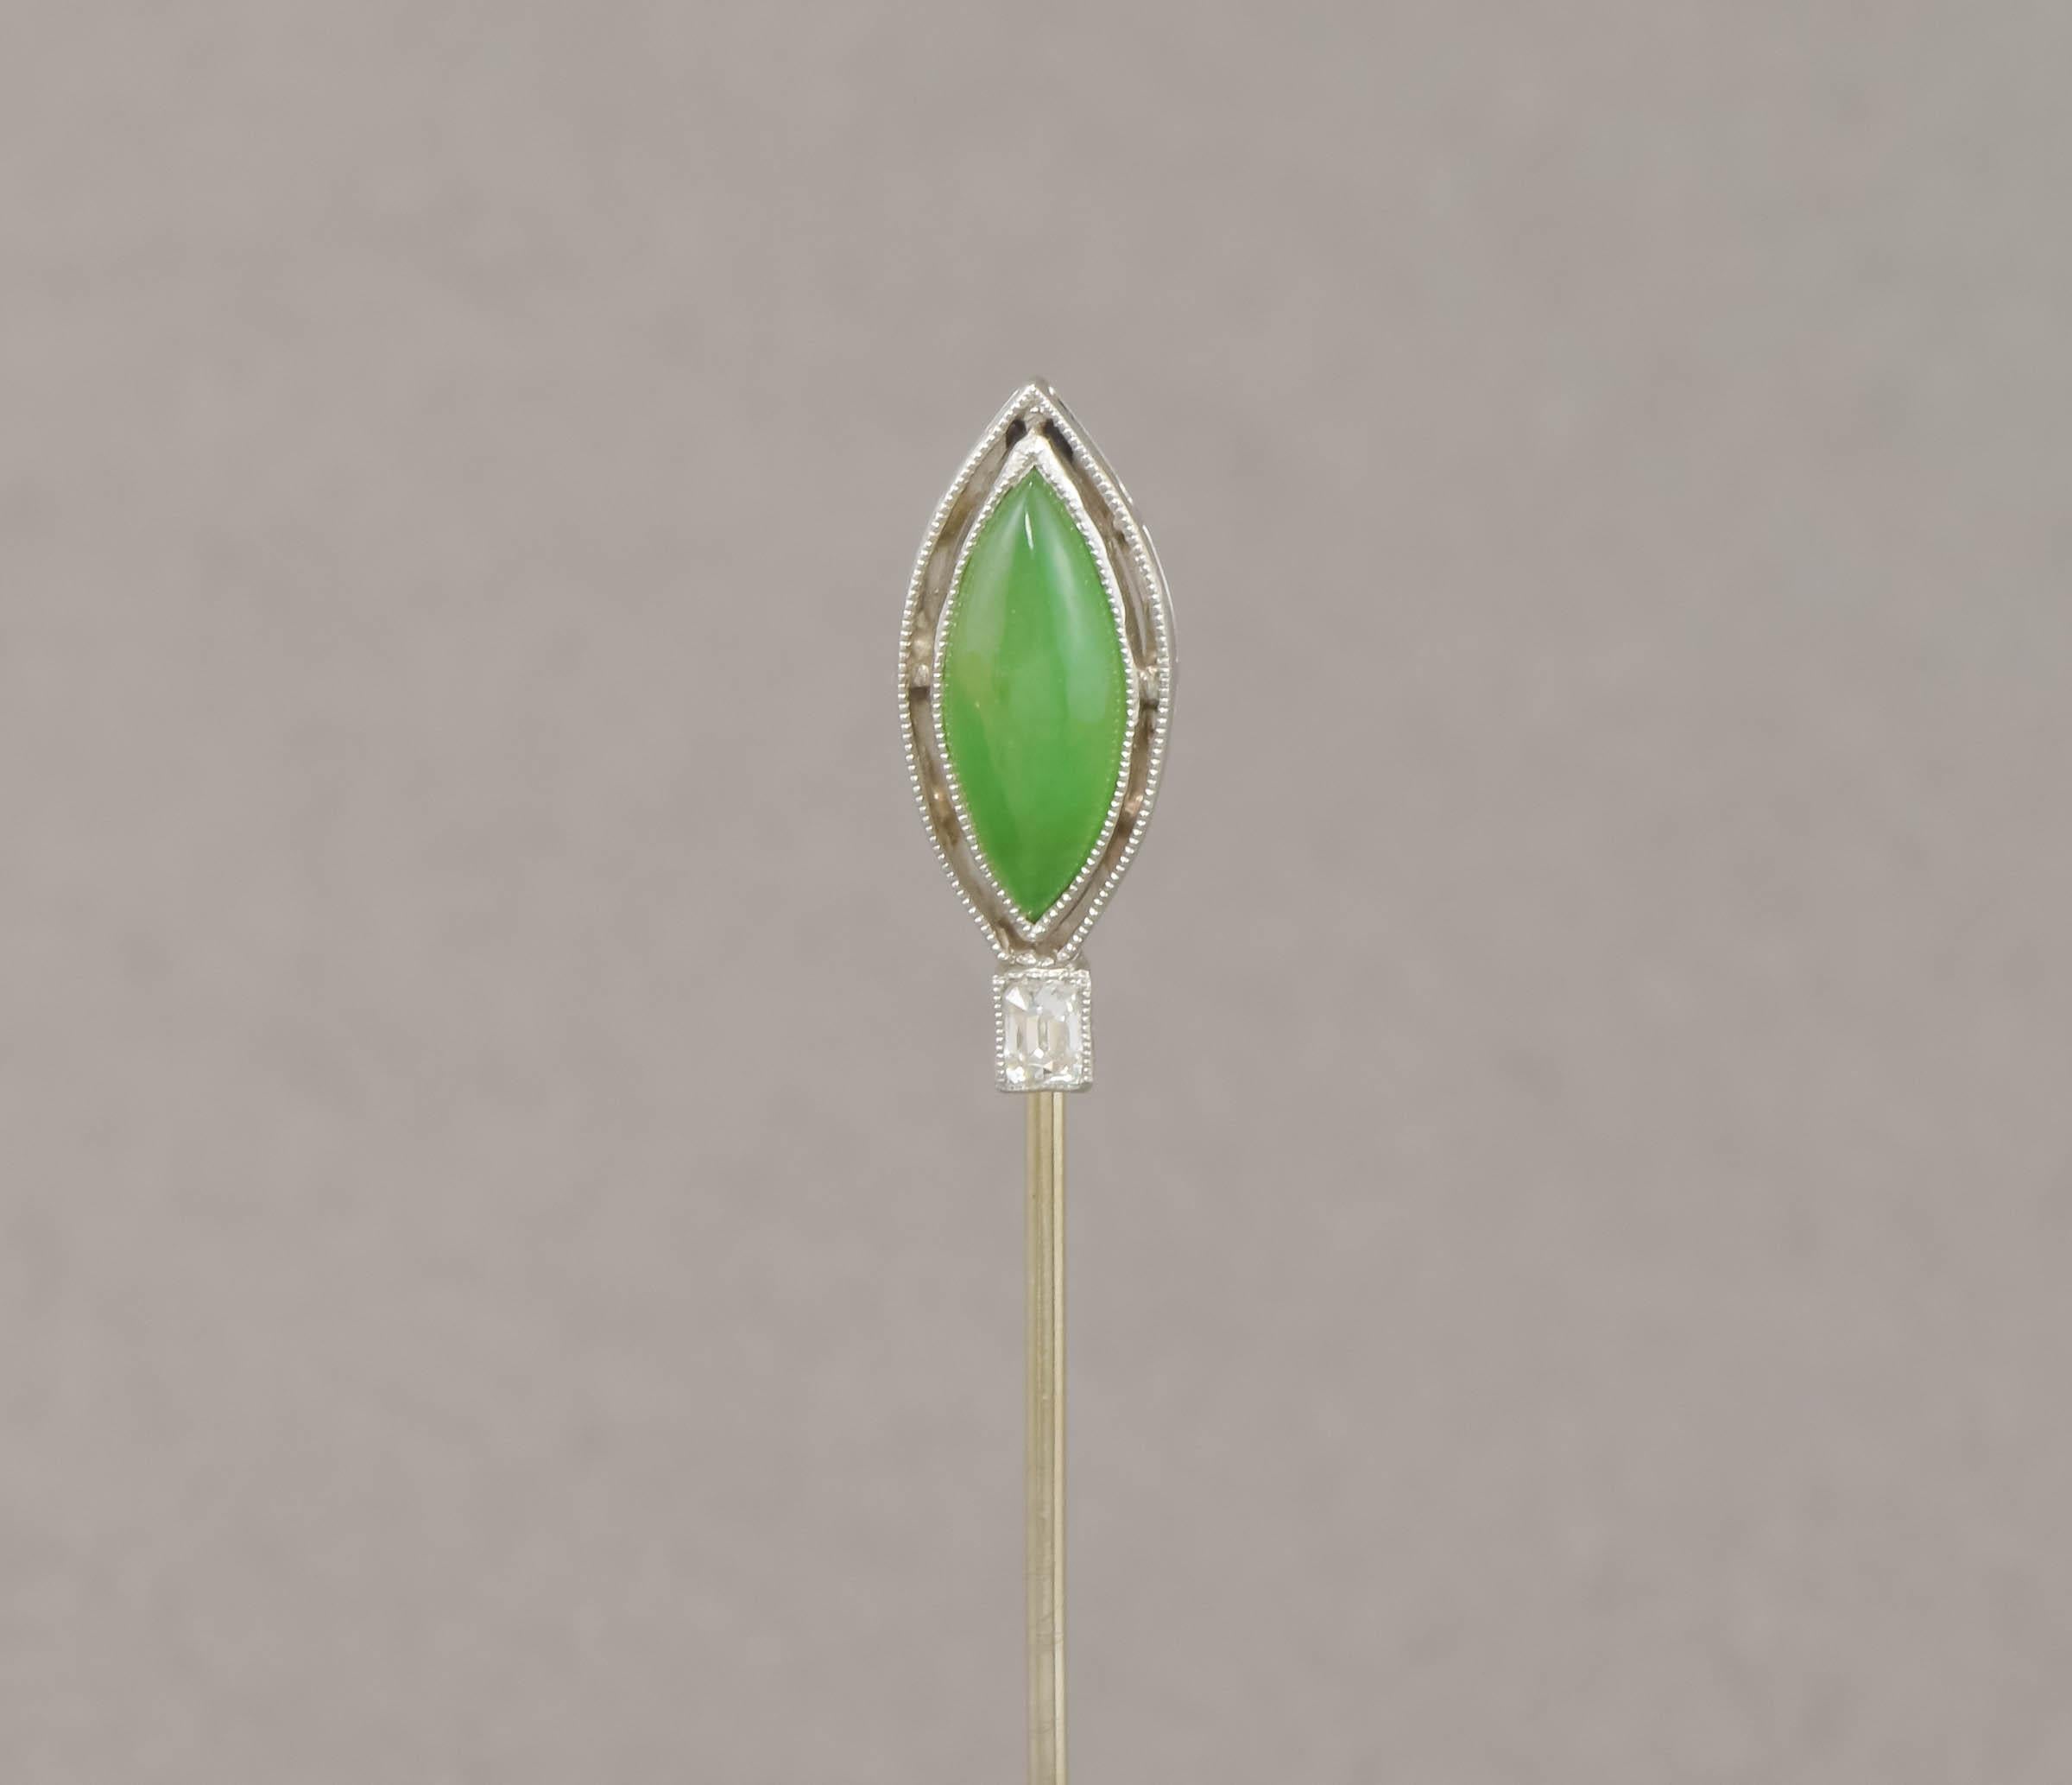 Art Deco Apple Green Jade Diamond Stick Pin - Cravat Pin in Platinum & 18K Gold In Good Condition For Sale In Danvers, MA